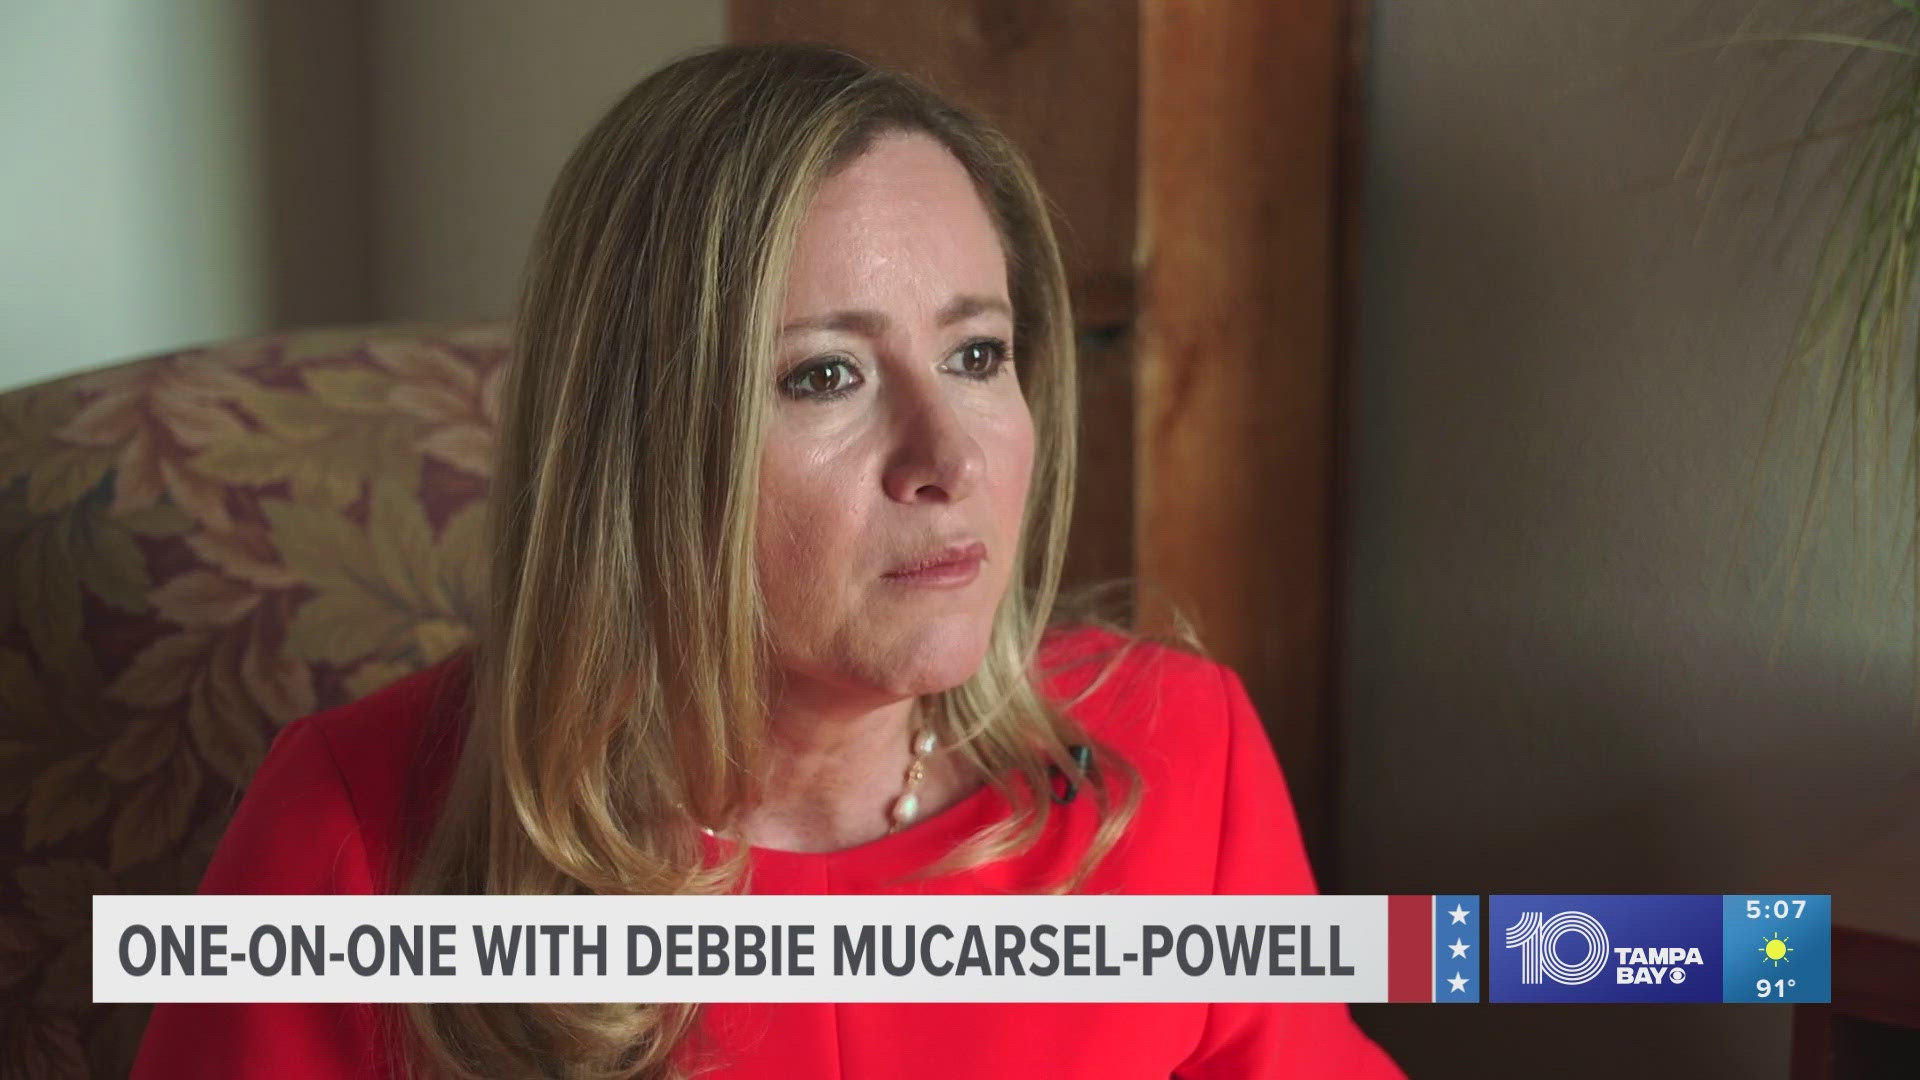 Senate Democratic nominee Mucarsel-Powell disagrees with Biden, saying Florida needs to be fought for by the democrats.